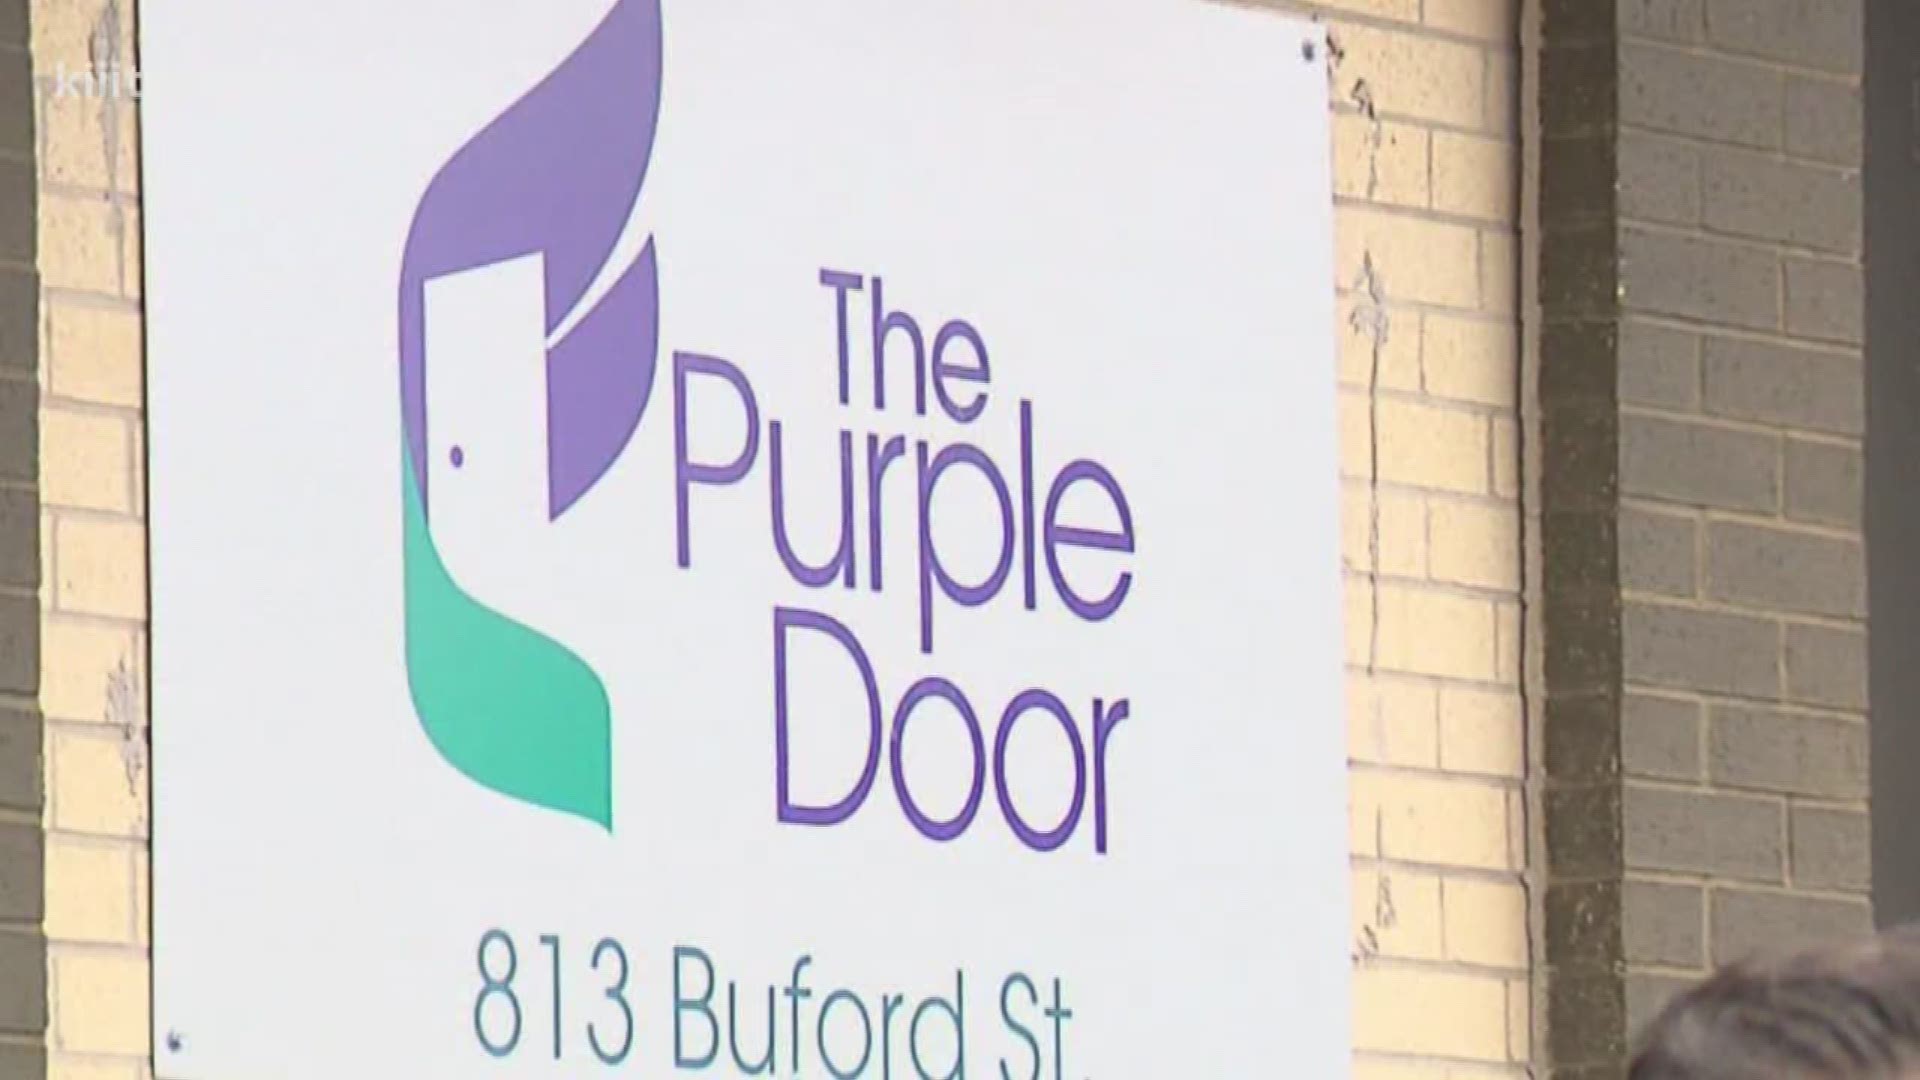 The Purple Door received a $14,000 donation from Allstate Insurance on Thursday to help them continue to provide free services to victims and survivors of domestic violence.